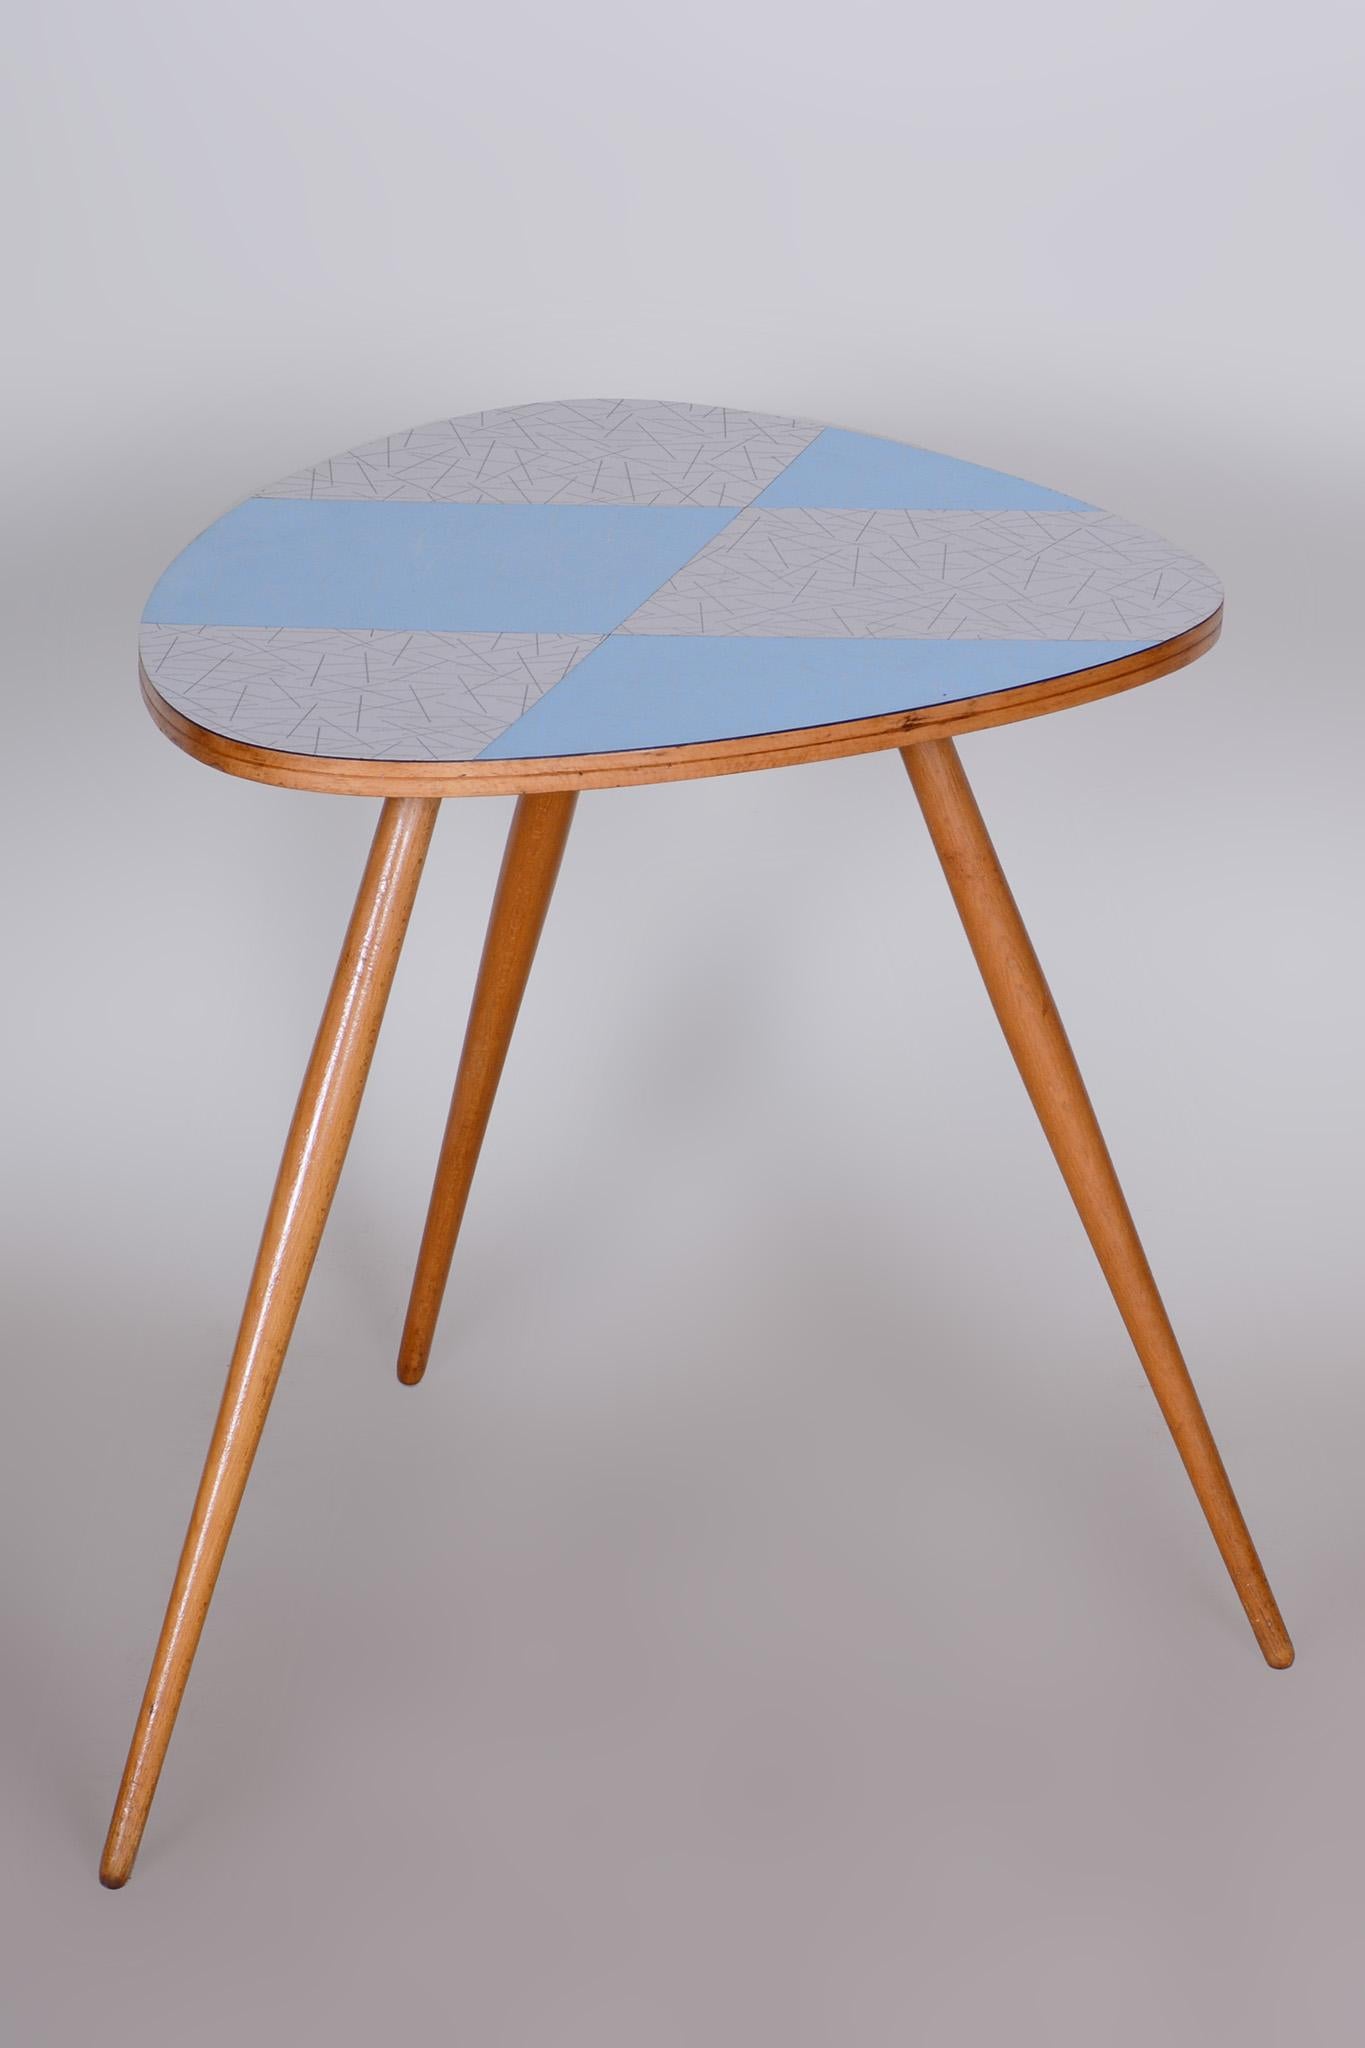 Small Midcentury Table, Beech, Umakart, Well-Preserved Condition, Czechia, 1950s In Good Condition For Sale In Horomerice, CZ